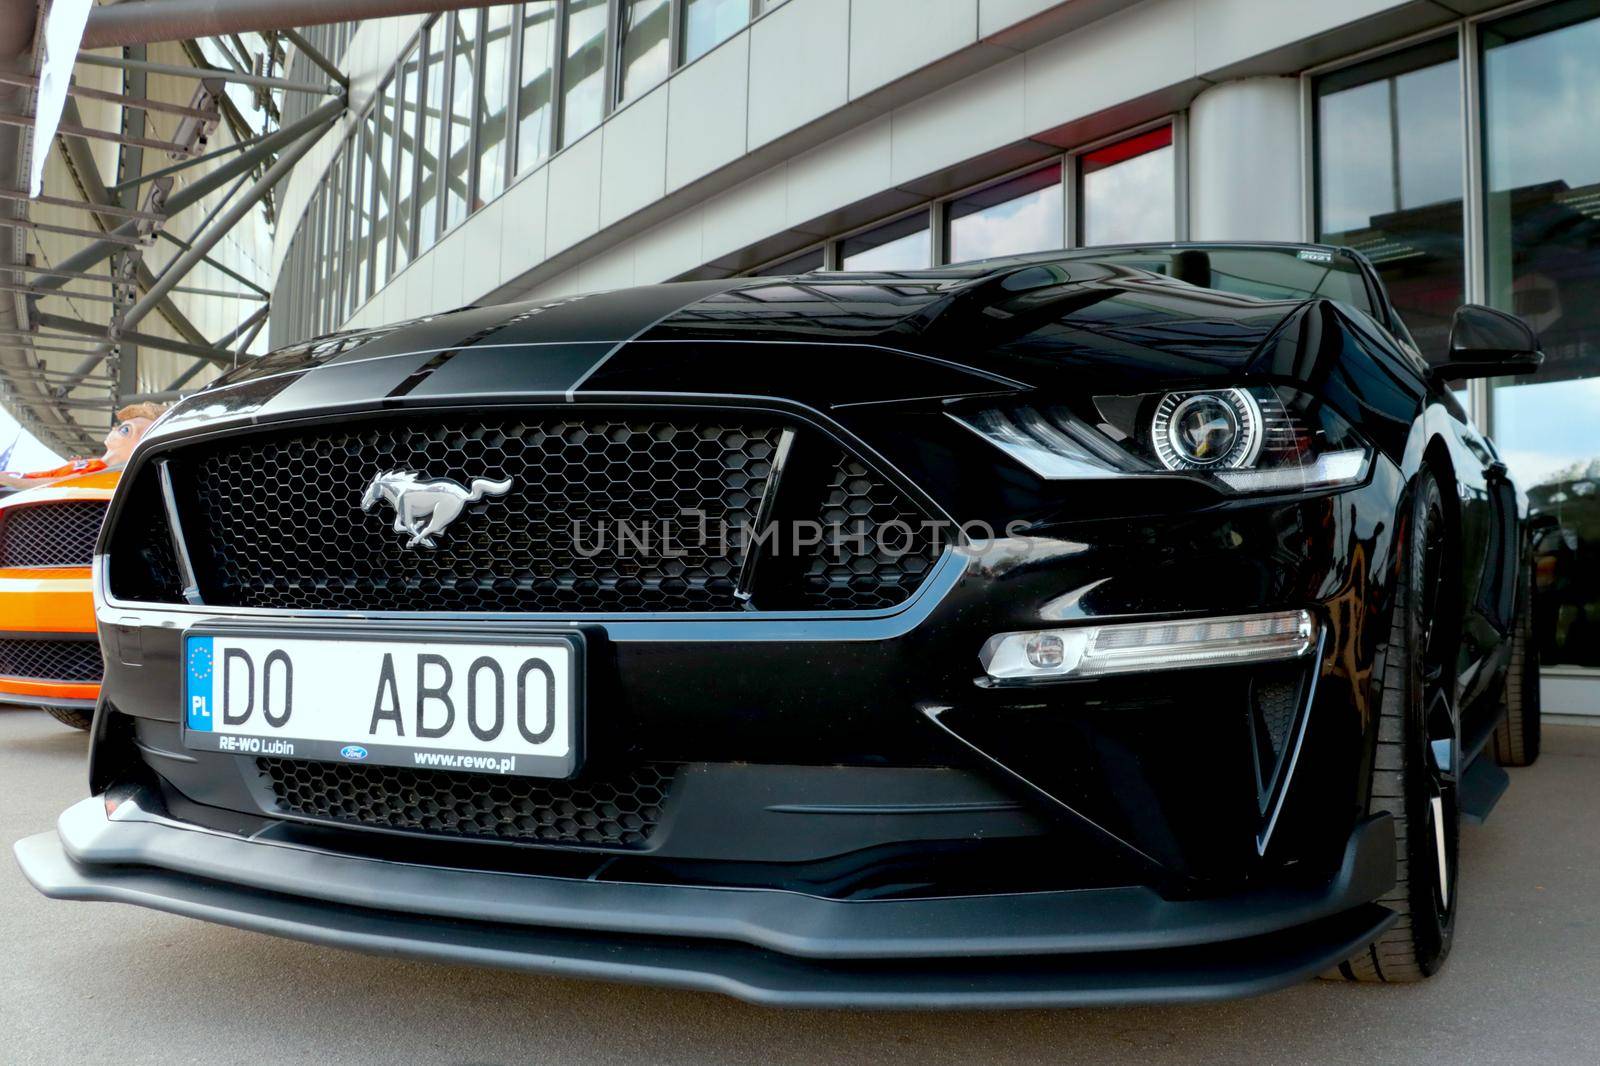 Wroclaw, Poland, August 25, 2021: the front of a sporty powerful black car Ford Mustang